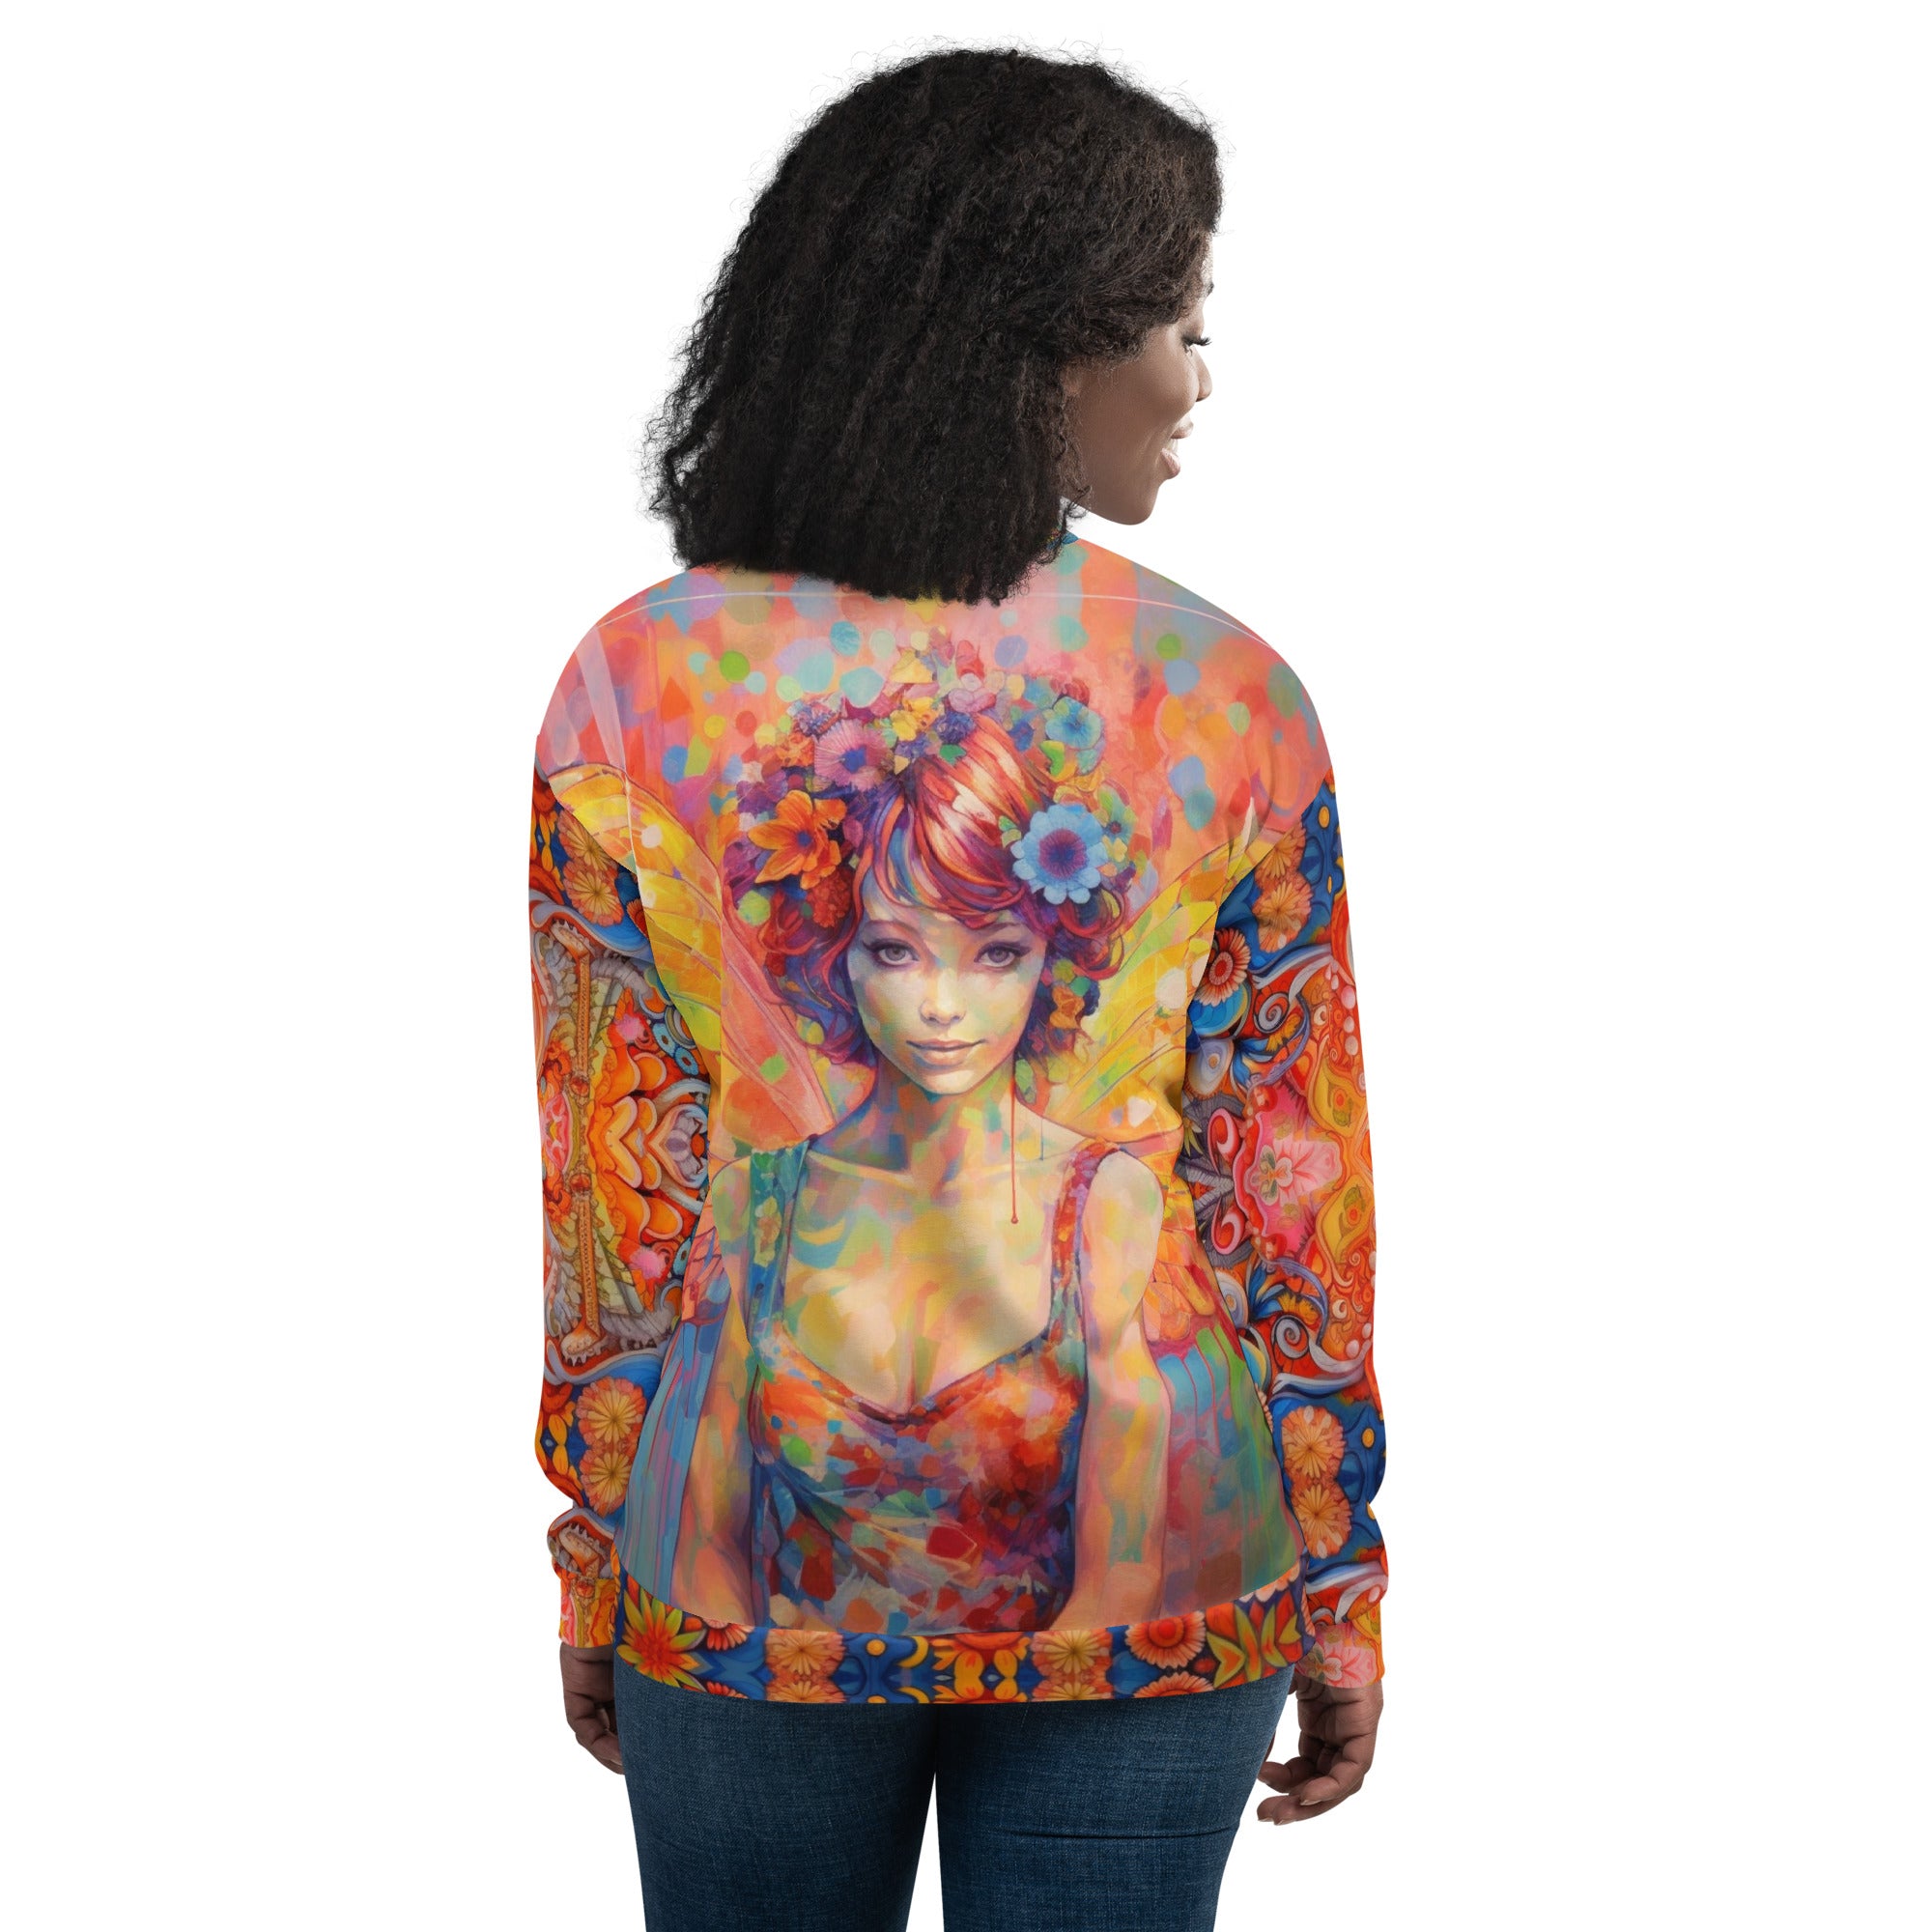 Fly High with the Flower Fairy Unisex Bomber Jacket!